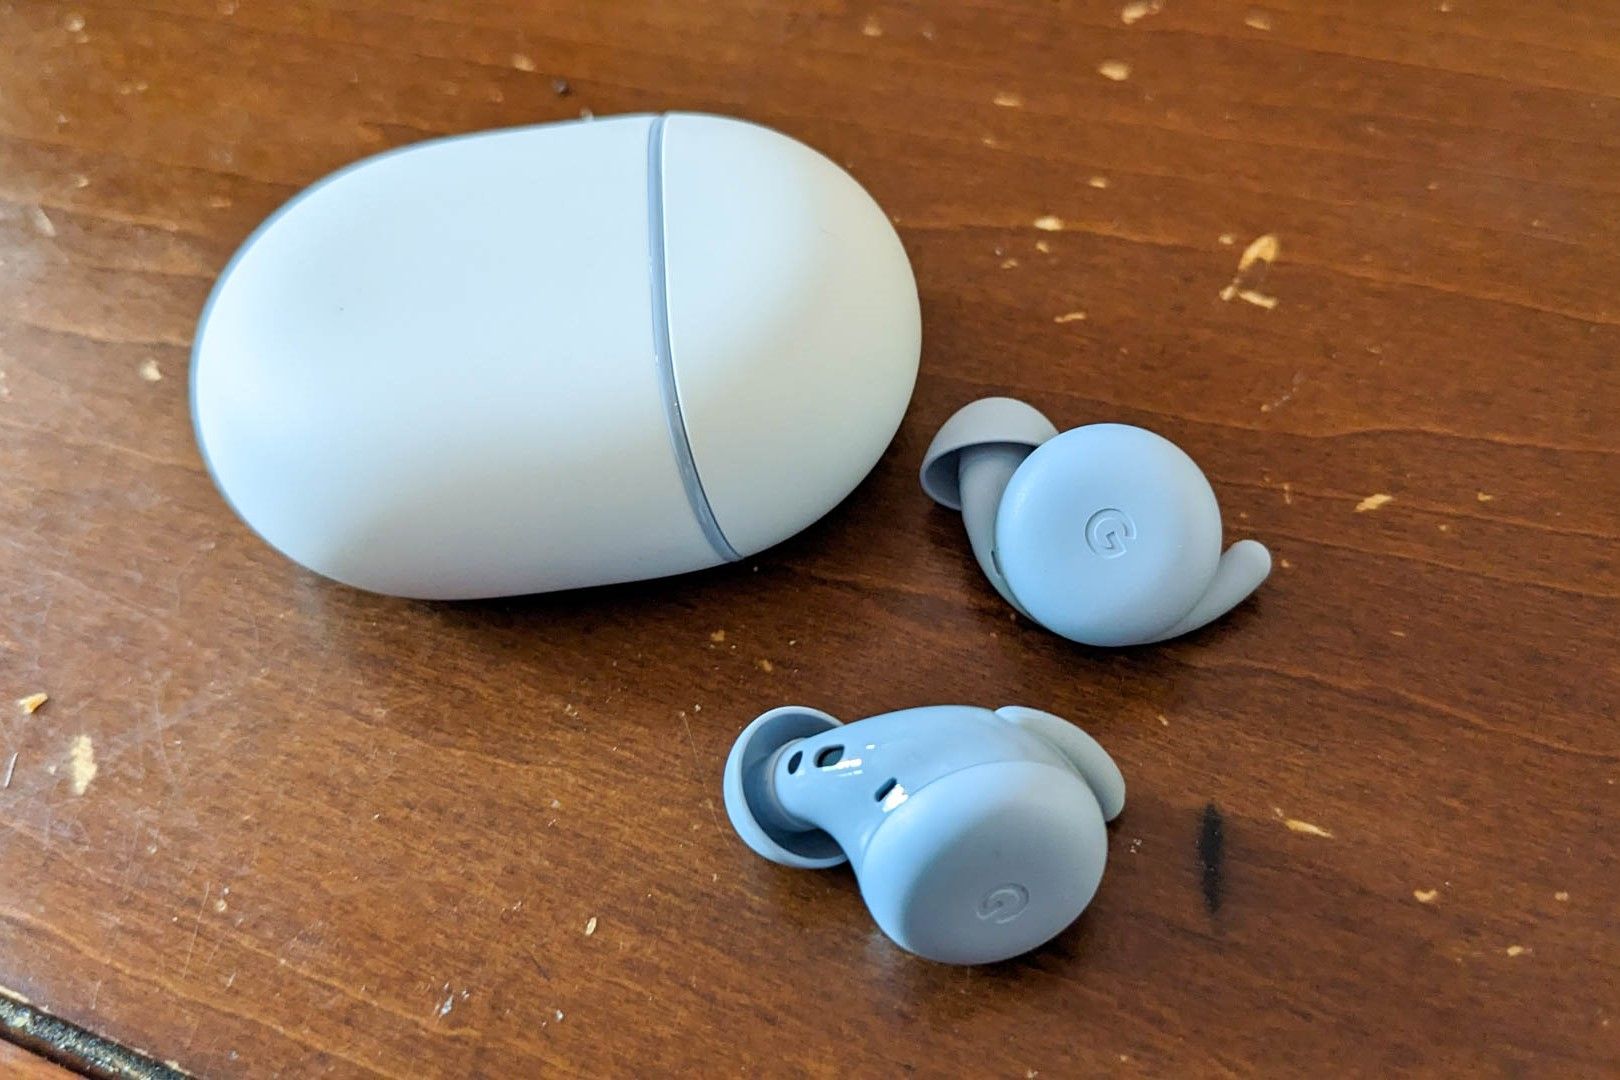 The Googel Pixel Buds A Series and their case